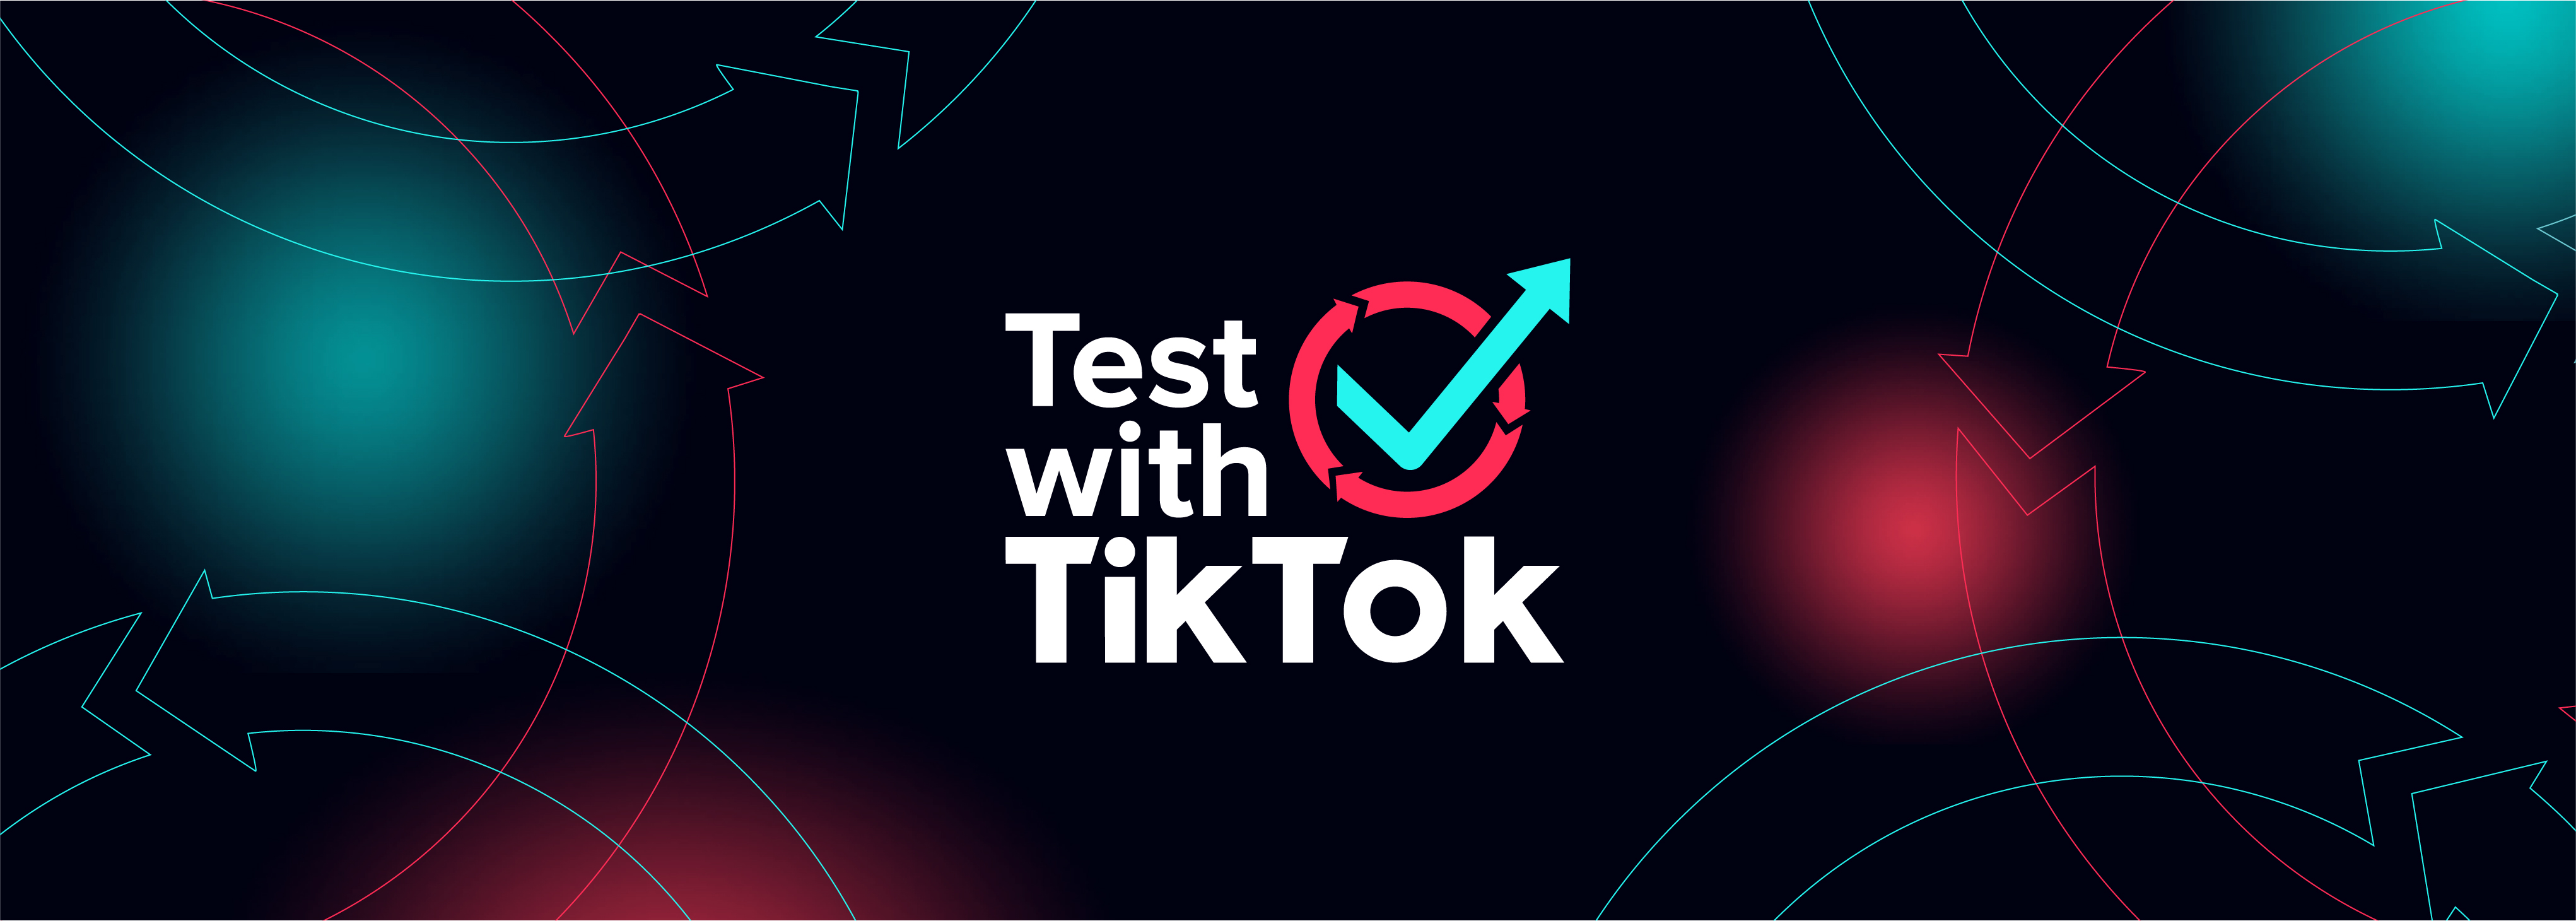 BA Test with TikTok: Scale Up Your Campaigns with Automation Solutions